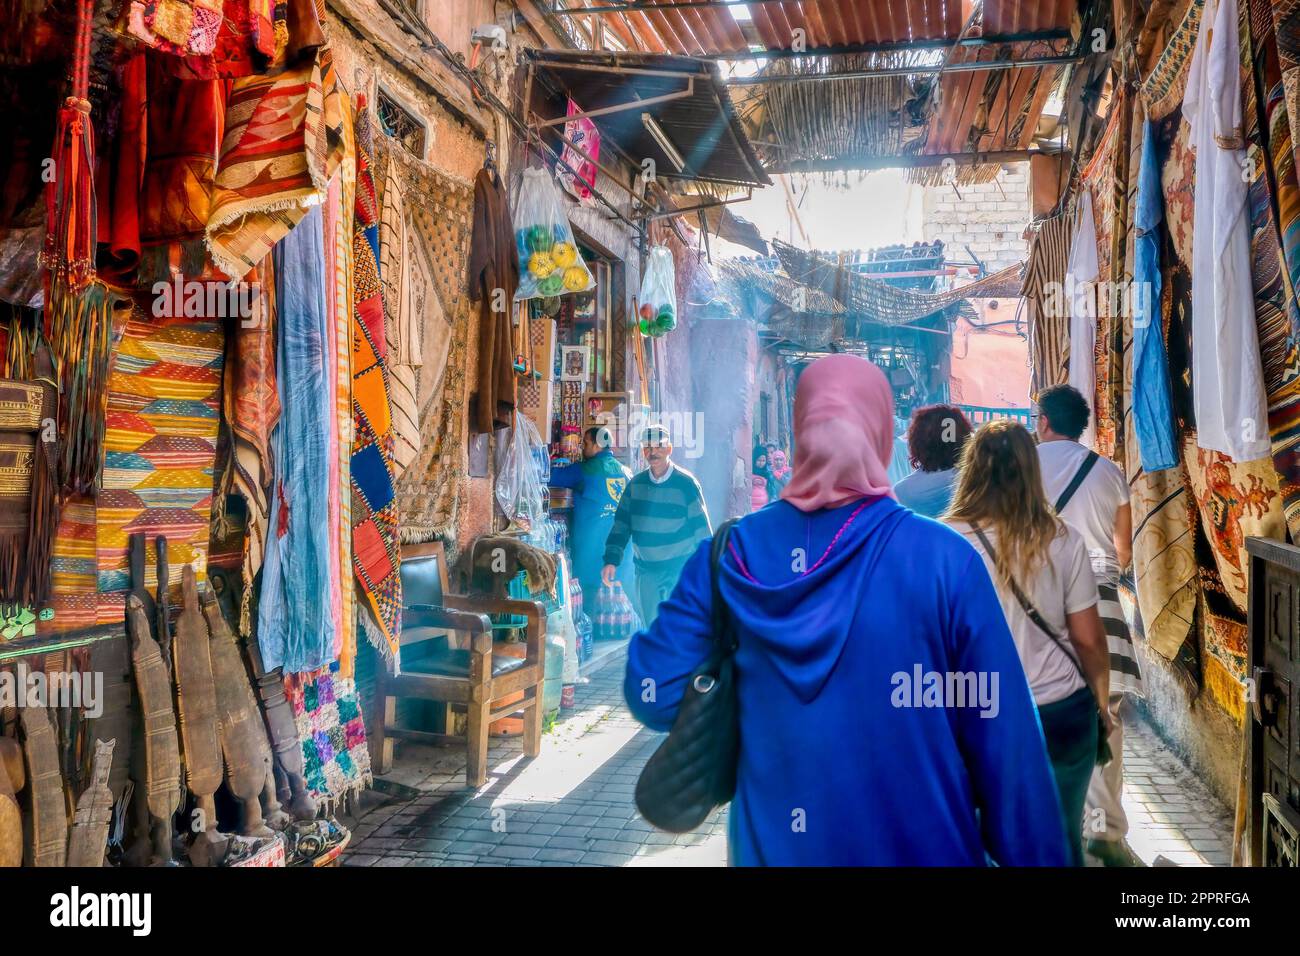 Marrakech, Morocco - Oct 19, 2015. Early morning in the Old City souk, as pedestrians walk on a narrow street past shops selling tourist merchandise. Stock Photo